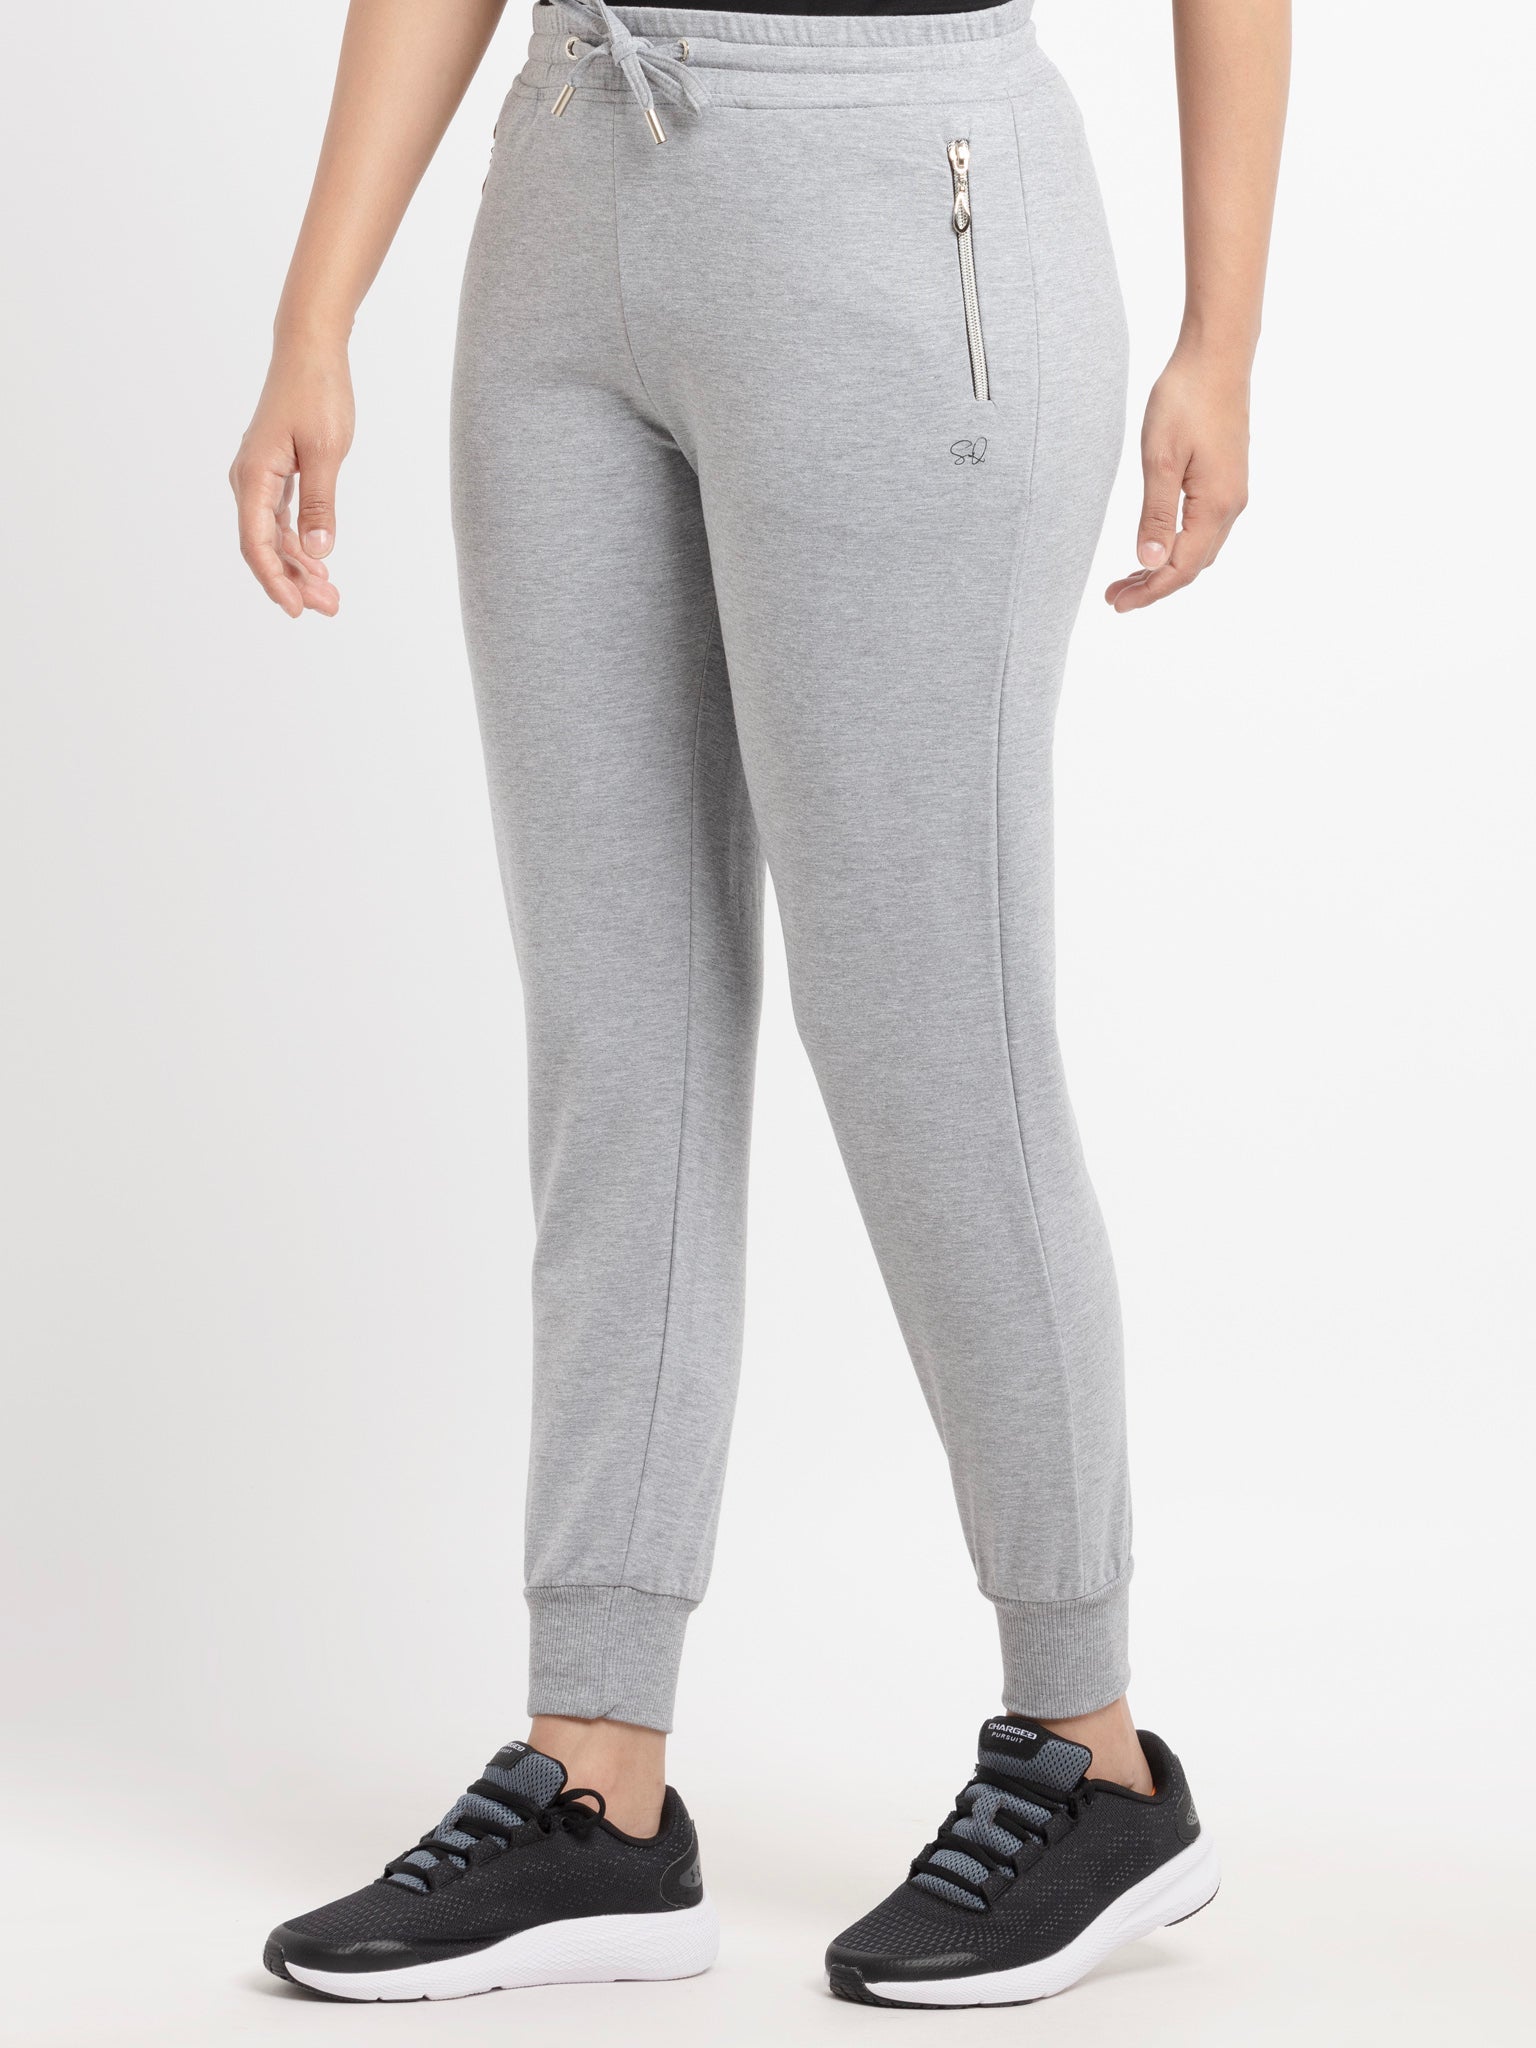 Women'ss Full length Solid Joggers